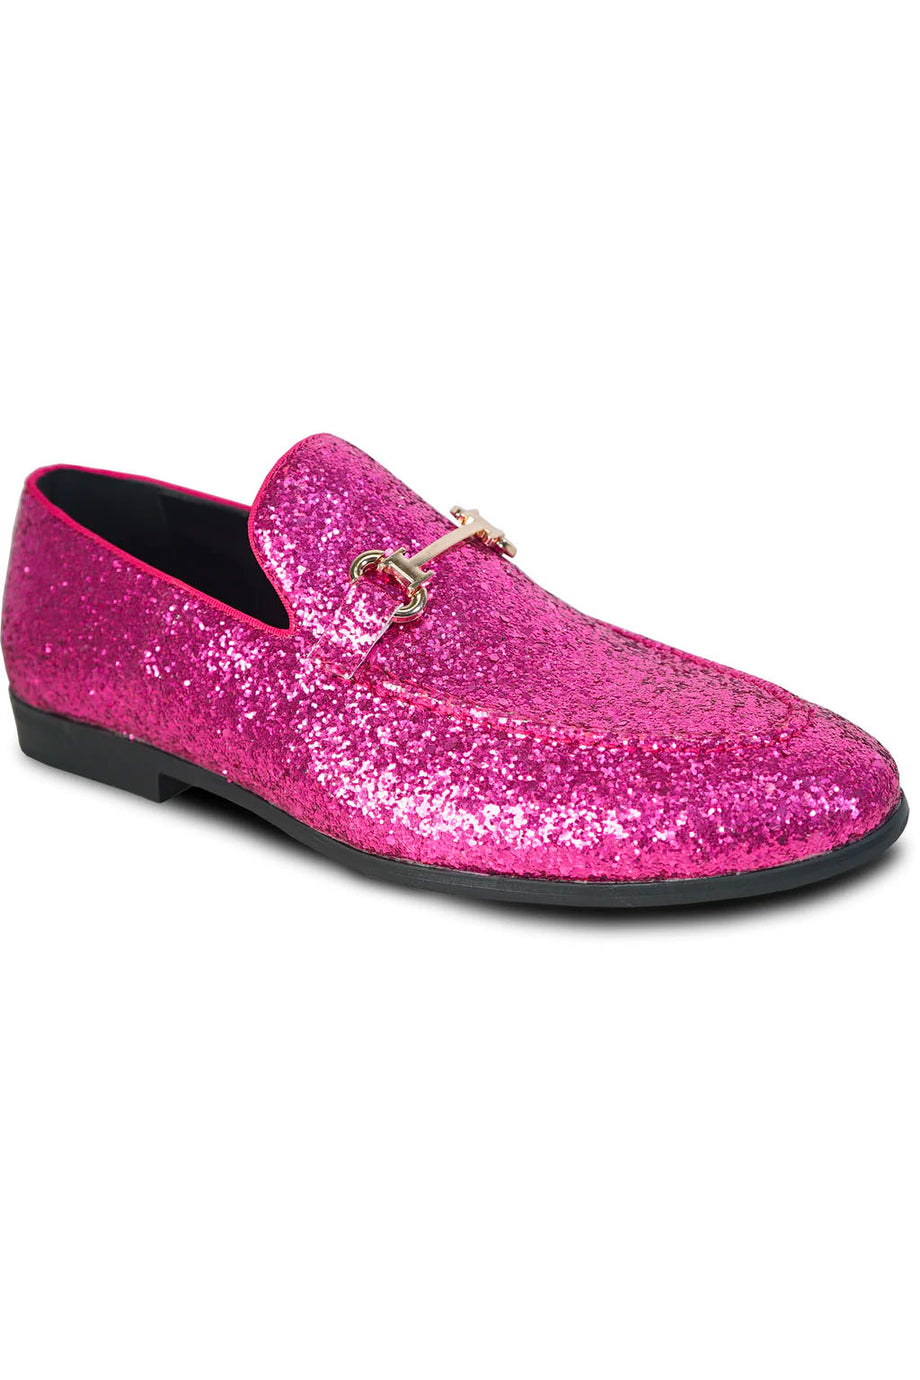 "Glitter" Pink Shoes